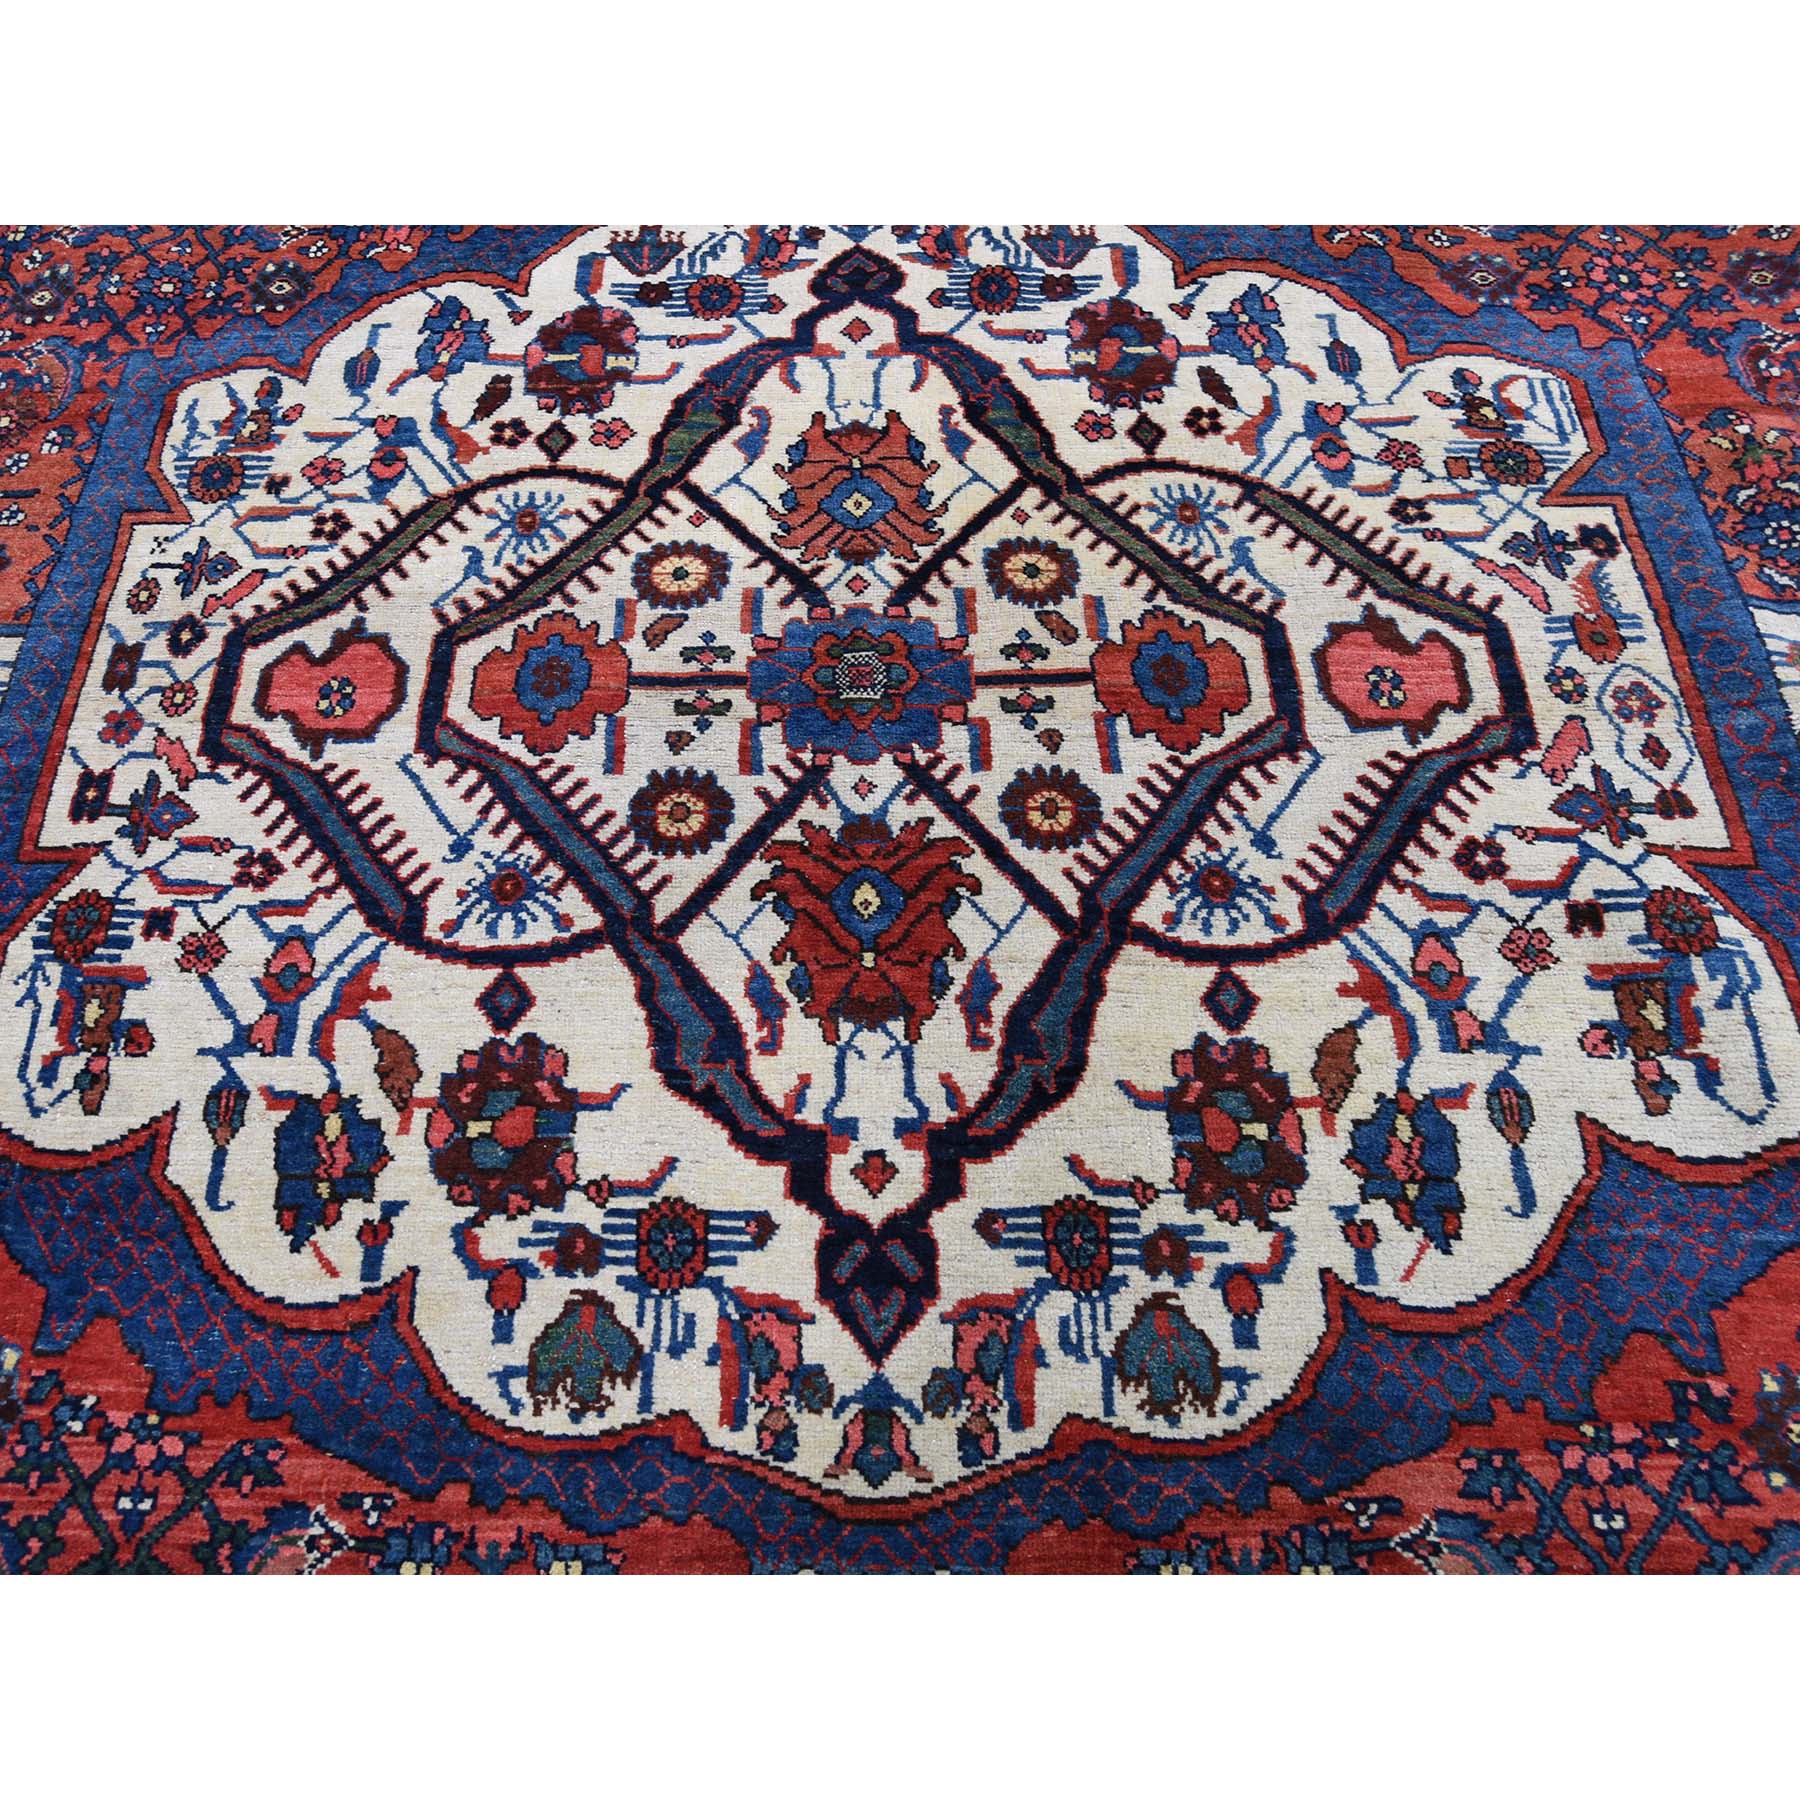 14'6"x19' Antique Persian Bijar Pure Wool Exc Condition Oversize Pure Wool Hand Woven Oriental Rug 